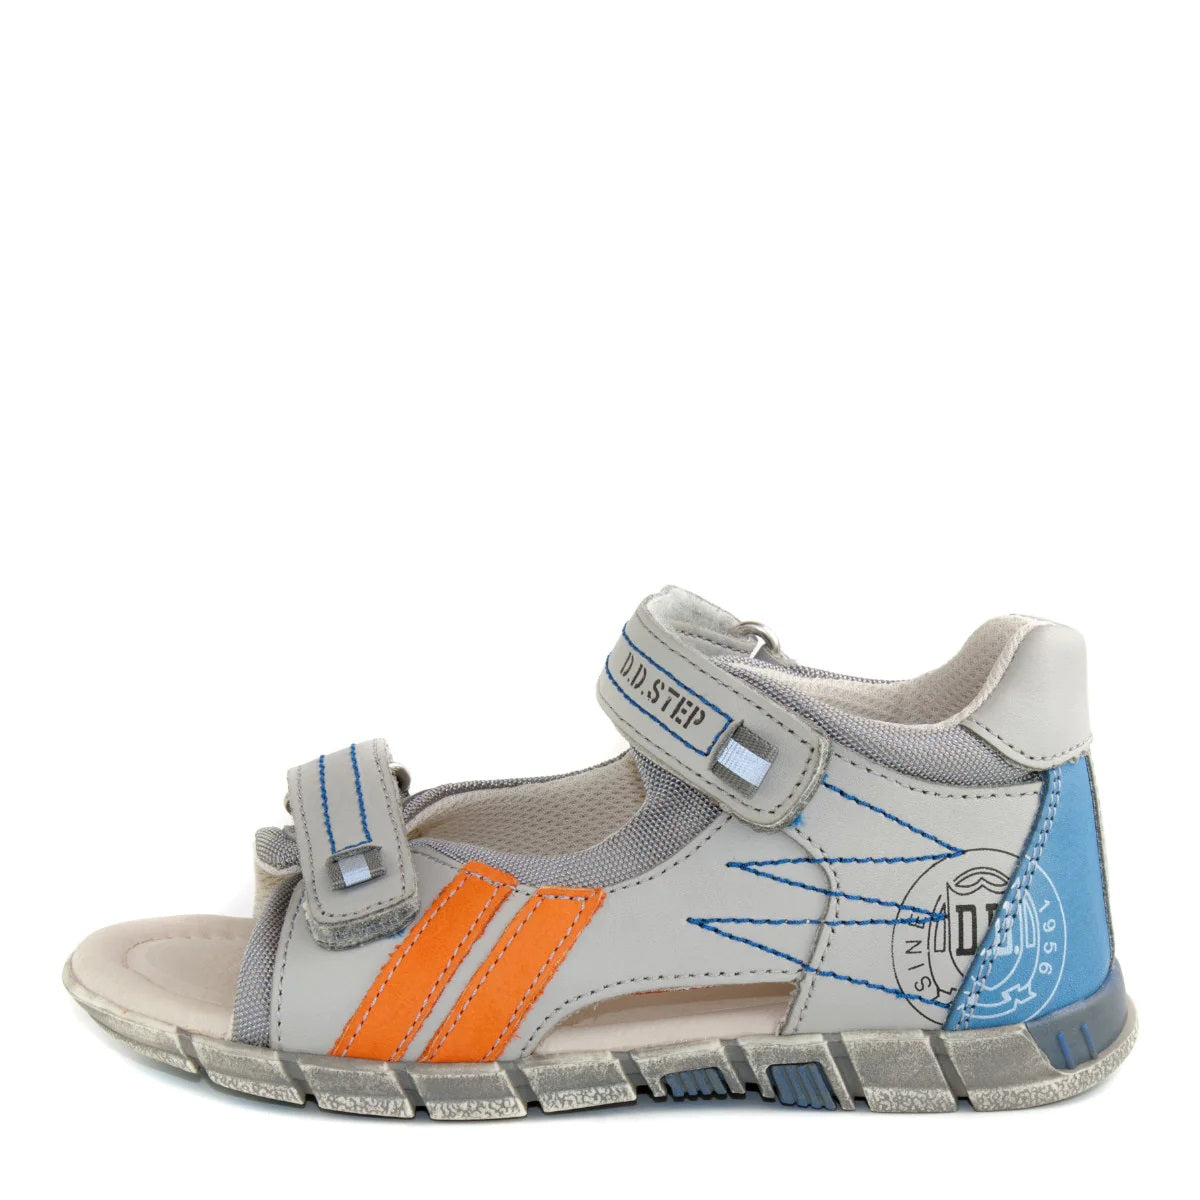 Premium quality sandals with genuine leather lining and upper grey with orange stripes. Thanks to its high level of specialization, D.D. Step knows exactly what your child’s feet need, to develop properly in the various phases of growth. The exceptional comfort these shoes provide assure the well-being and happiness of your child.